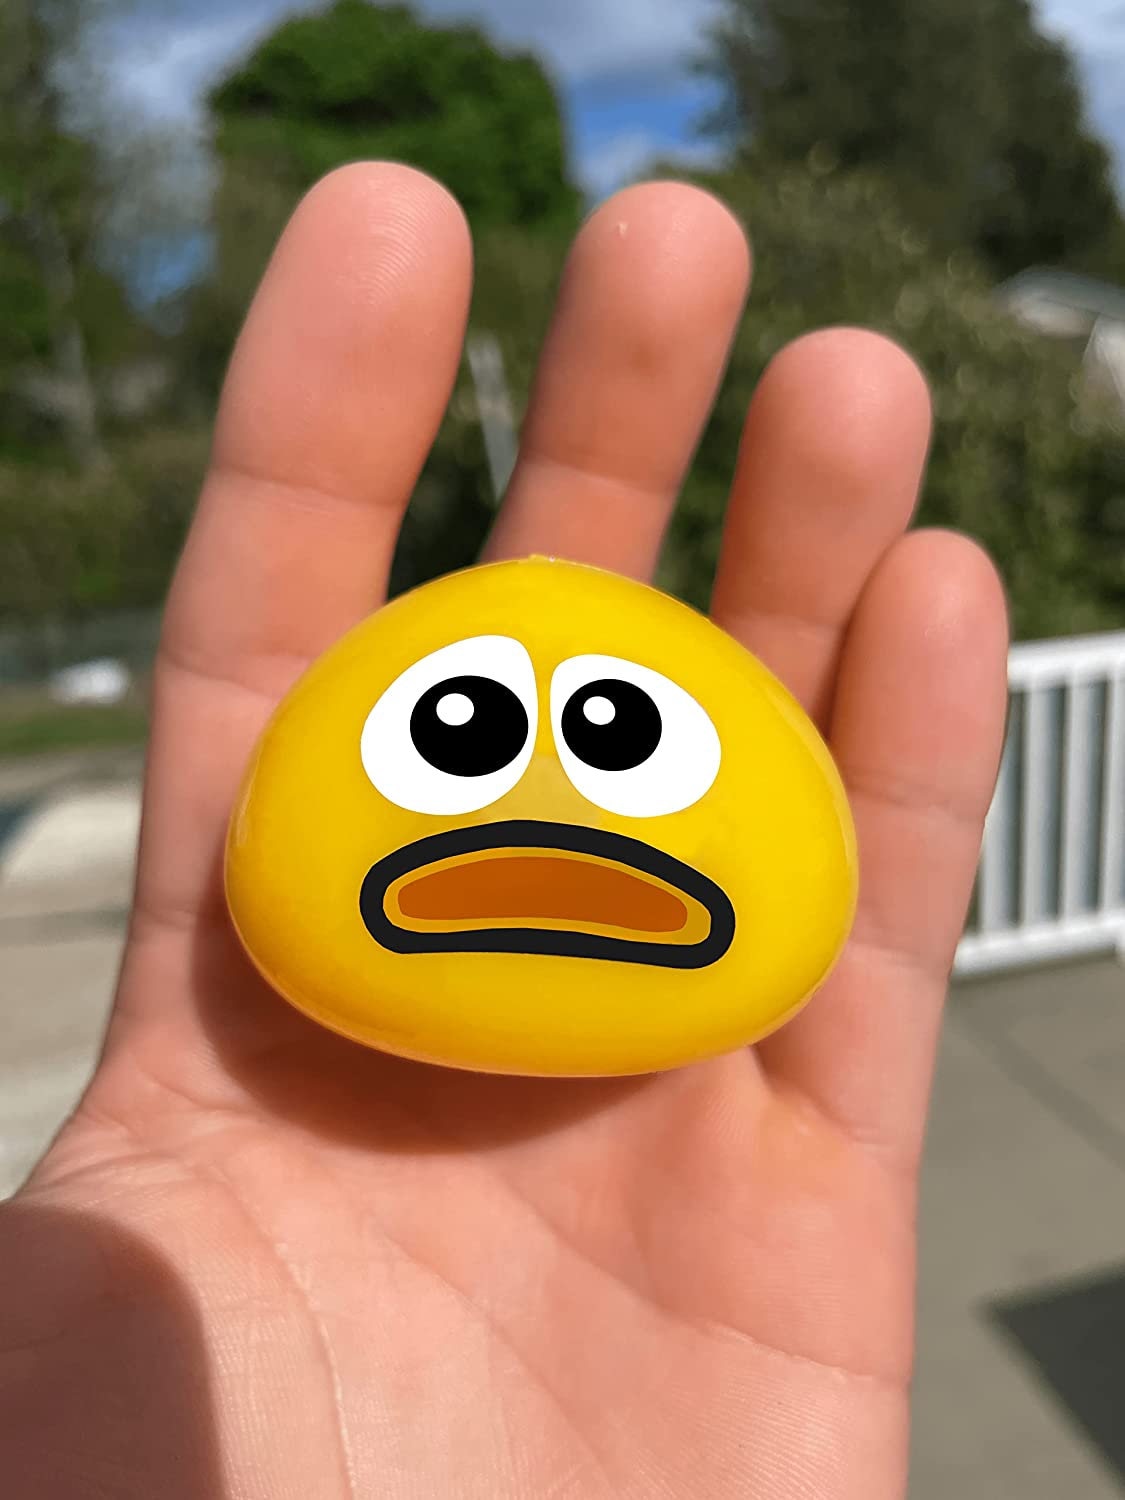 Puking Ball - Patented, Fidget Toy, Stress Ball, Slime, Sensory Toy for Kids Adults